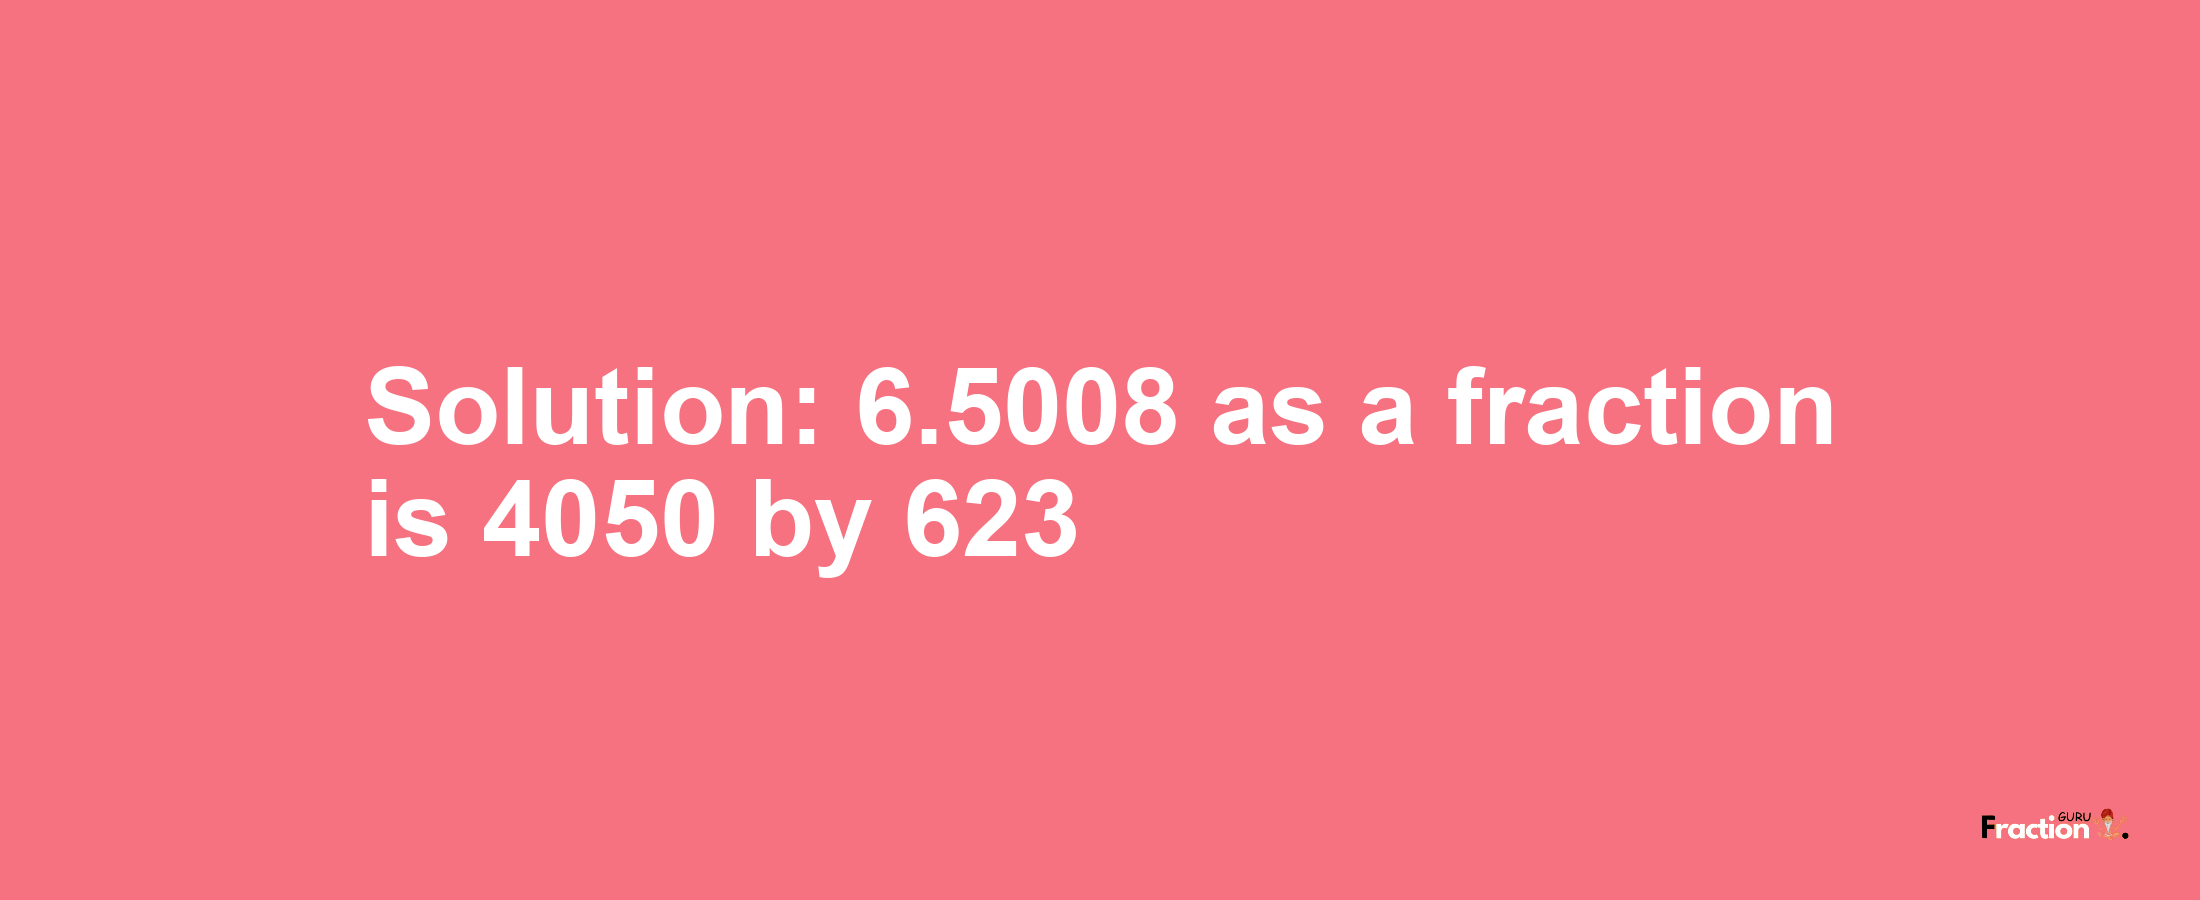 Solution:6.5008 as a fraction is 4050/623